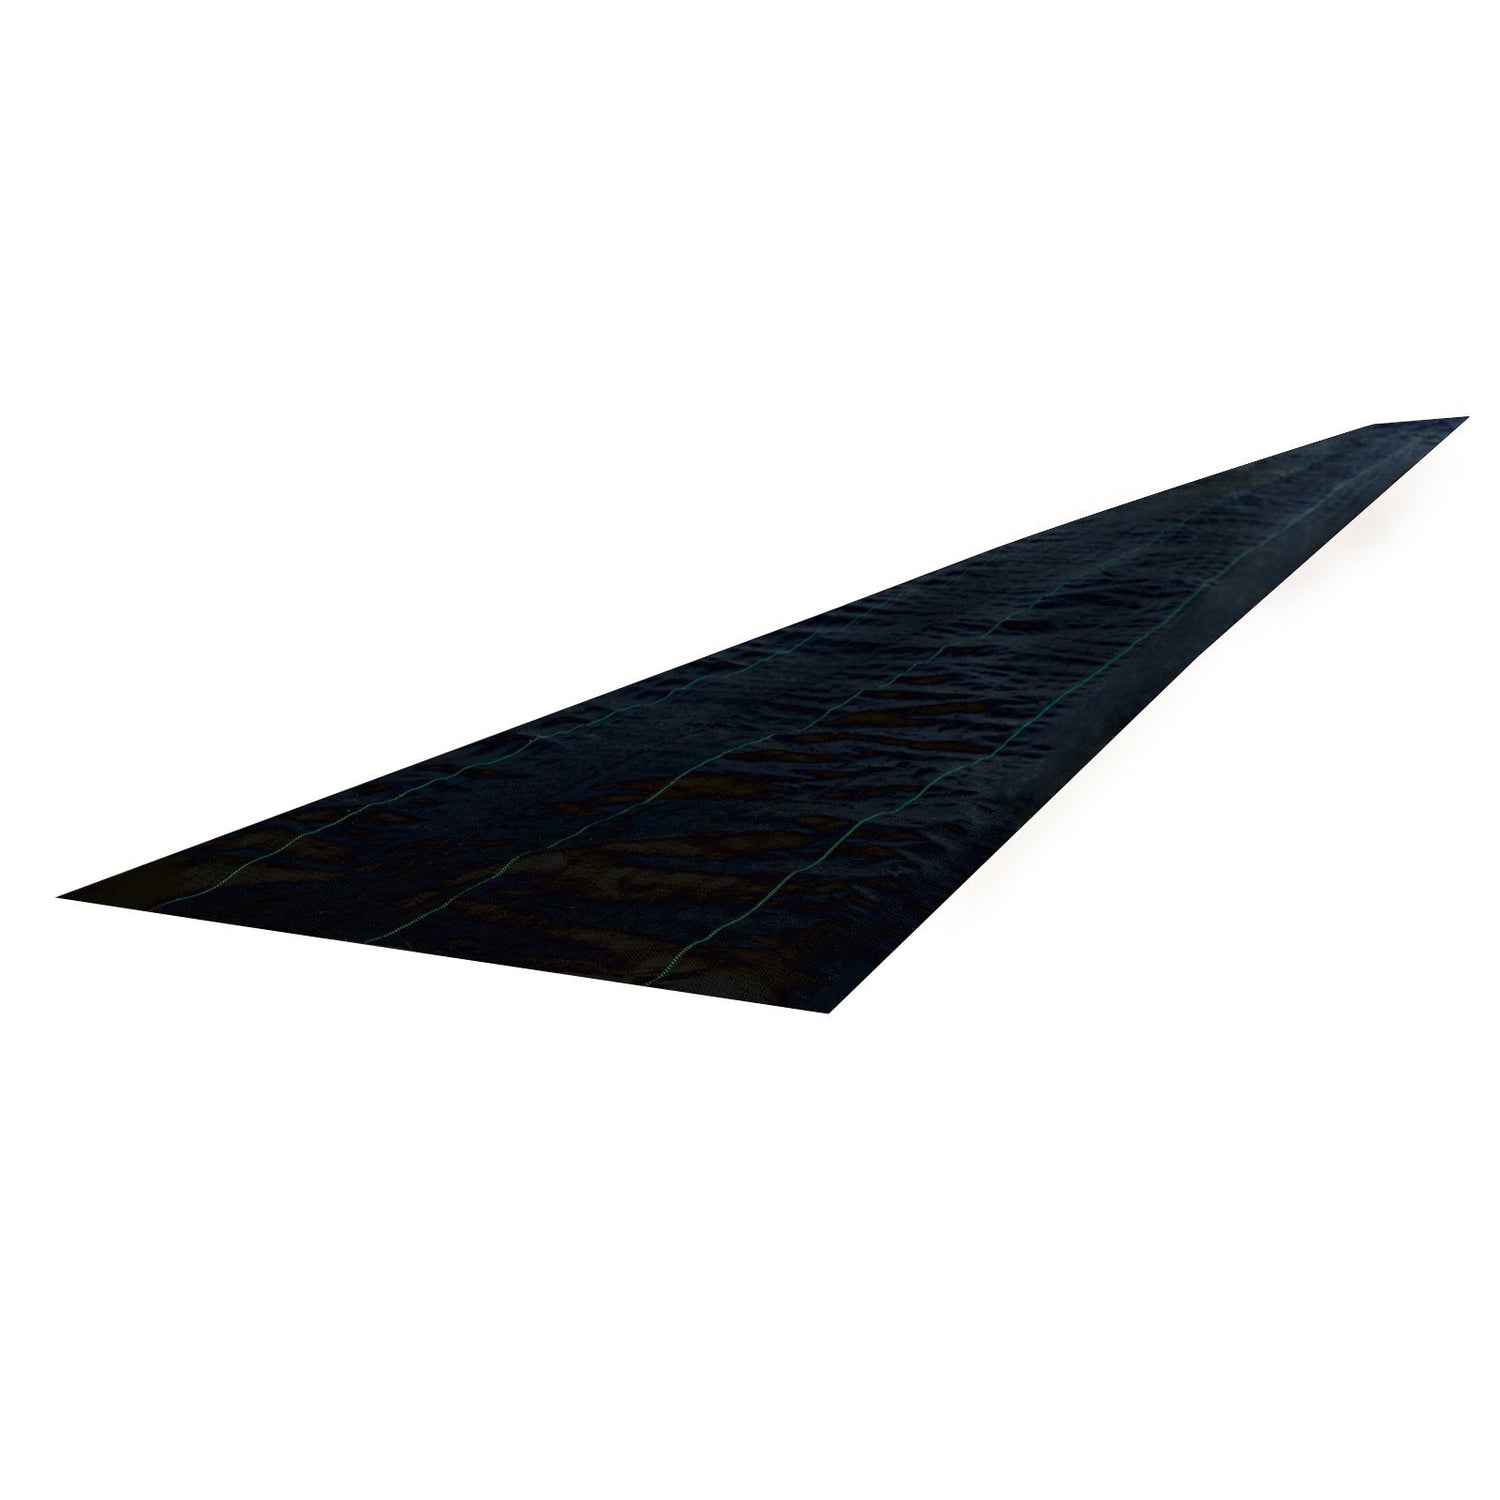 VEVOR 3FTx50FT Premium Weed Barrier Fabric - Heavy Duty 5OZ - Woven Weed Control Fabric - High Permeability - Flower Bed and Underlayment - Polyethylene Ground Cover - Ethereal Company